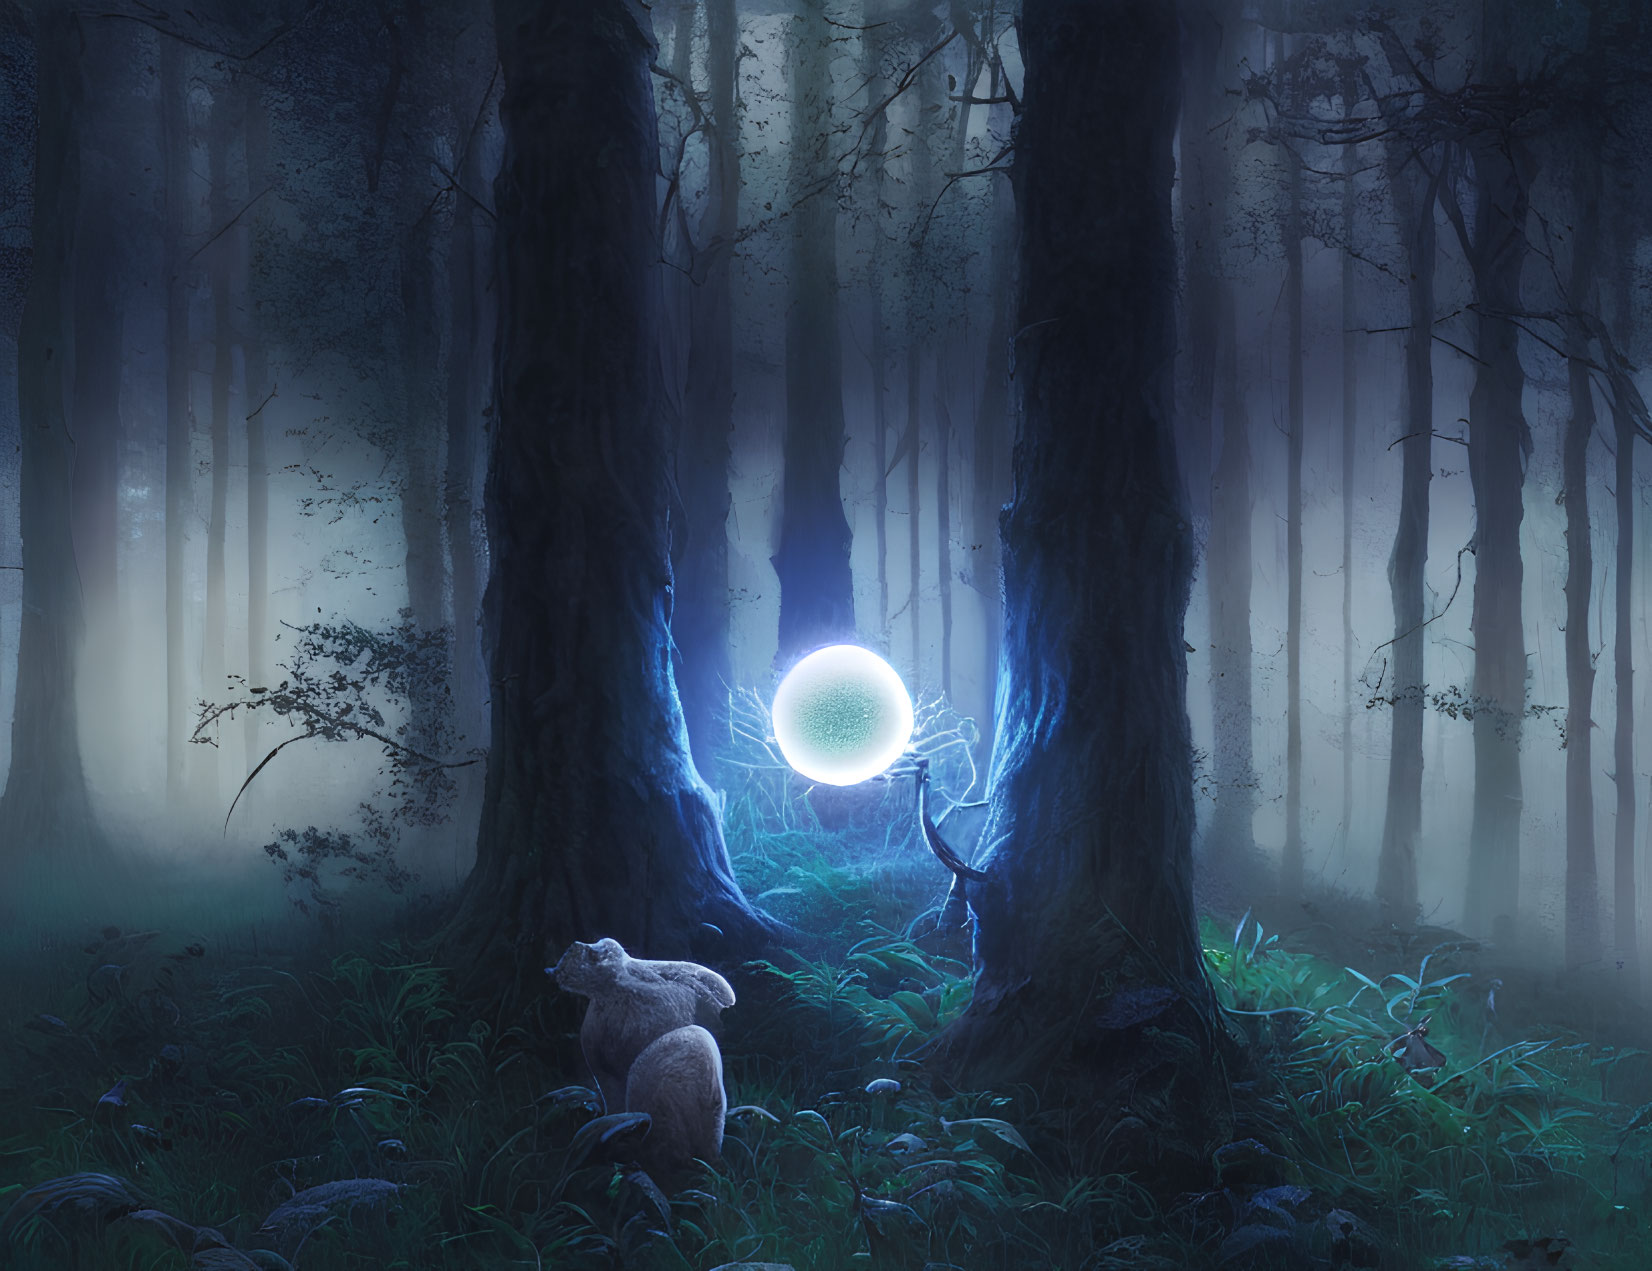 Mystical forest night scene with glowing orb, trees, and wolf in foggy backdrop